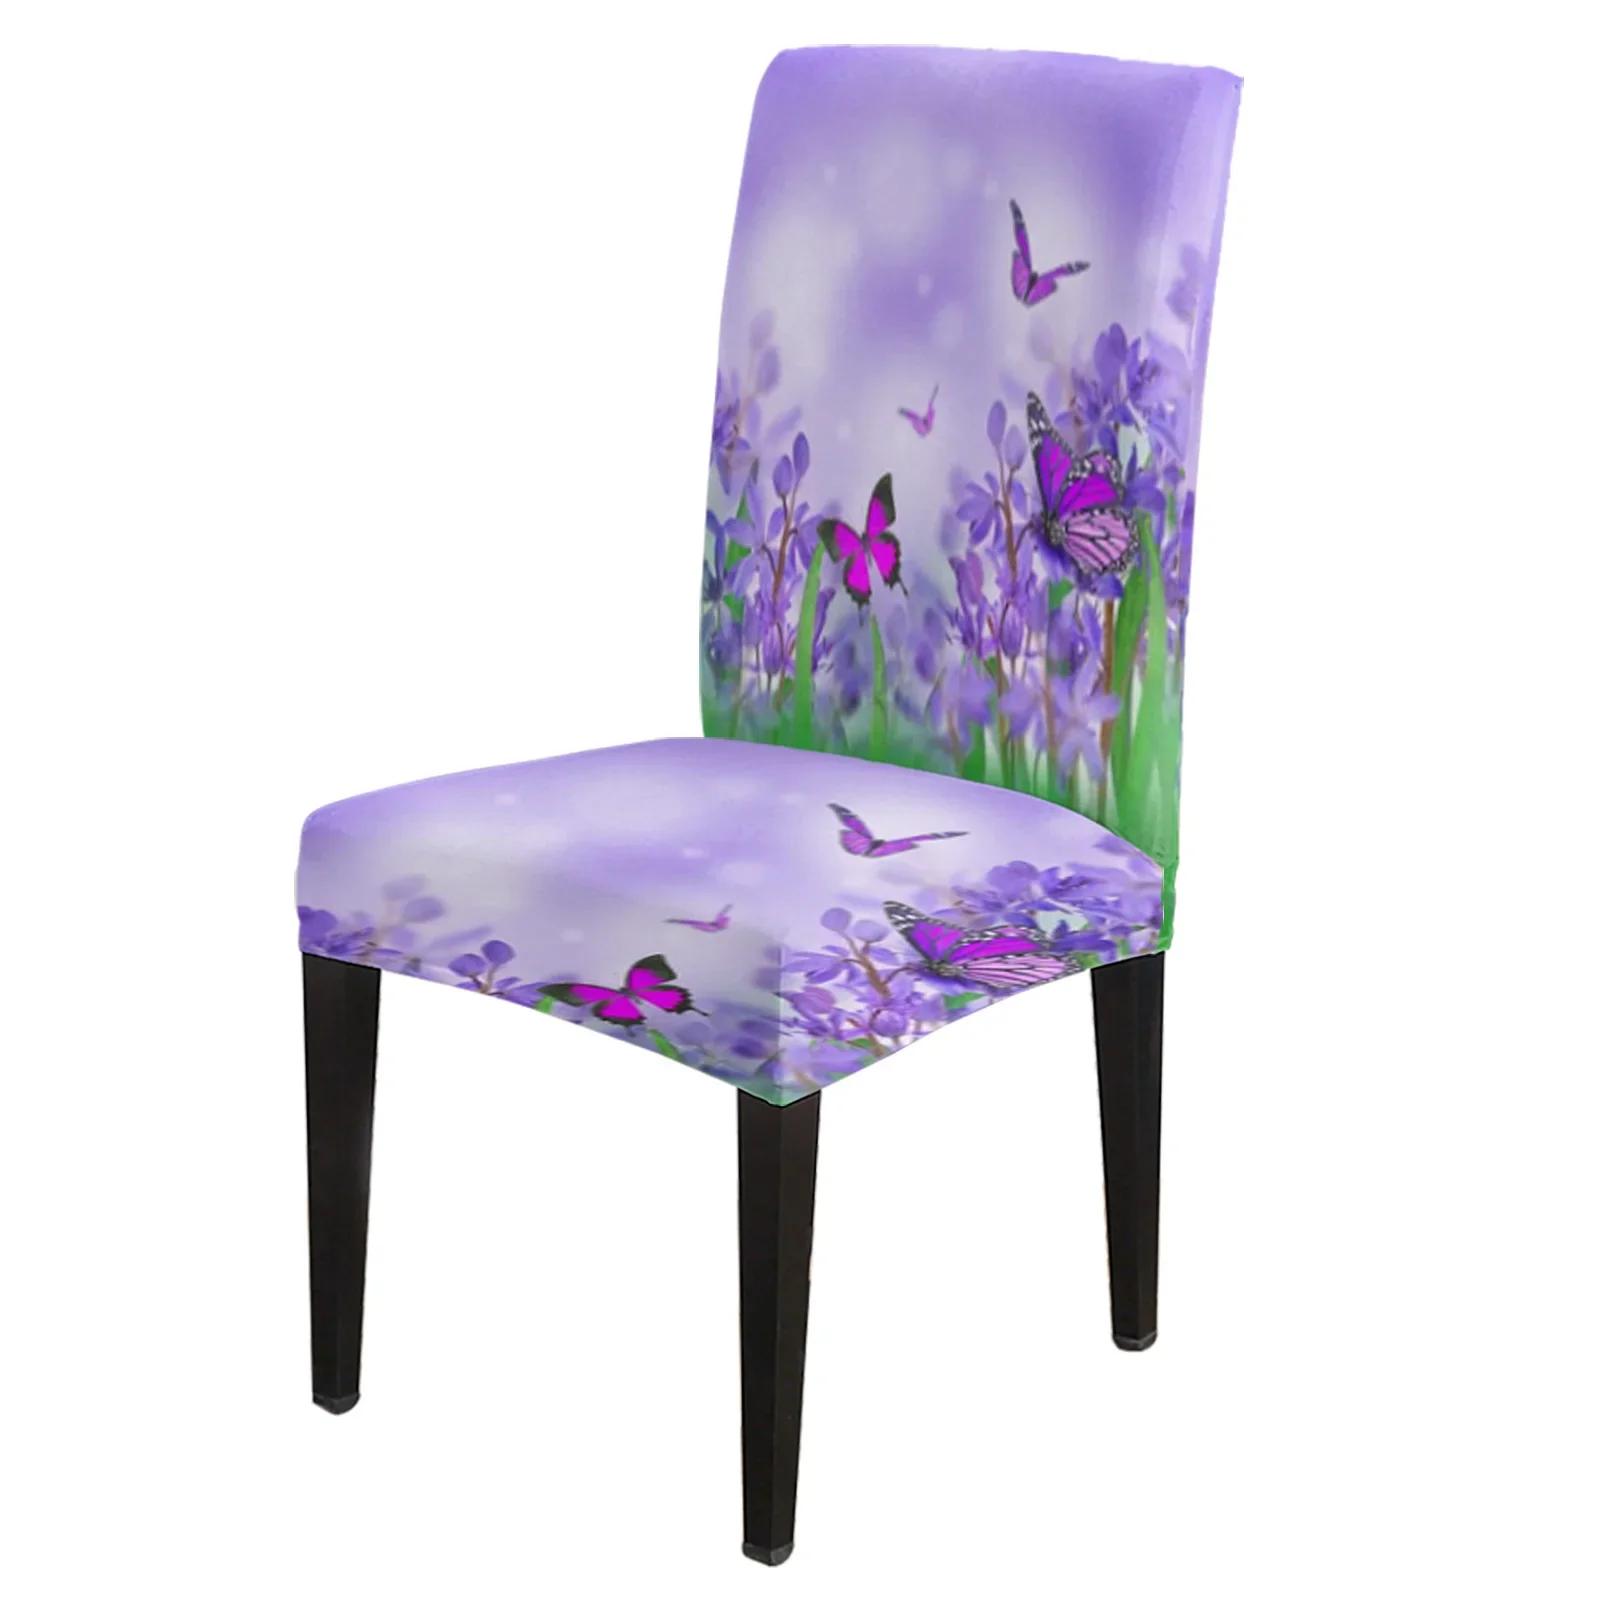 Spring Flower And Butterfly Stretch Chair Cover For Dining Room Spandex Slipcovers Chair Seat Covers For Wedding Ban